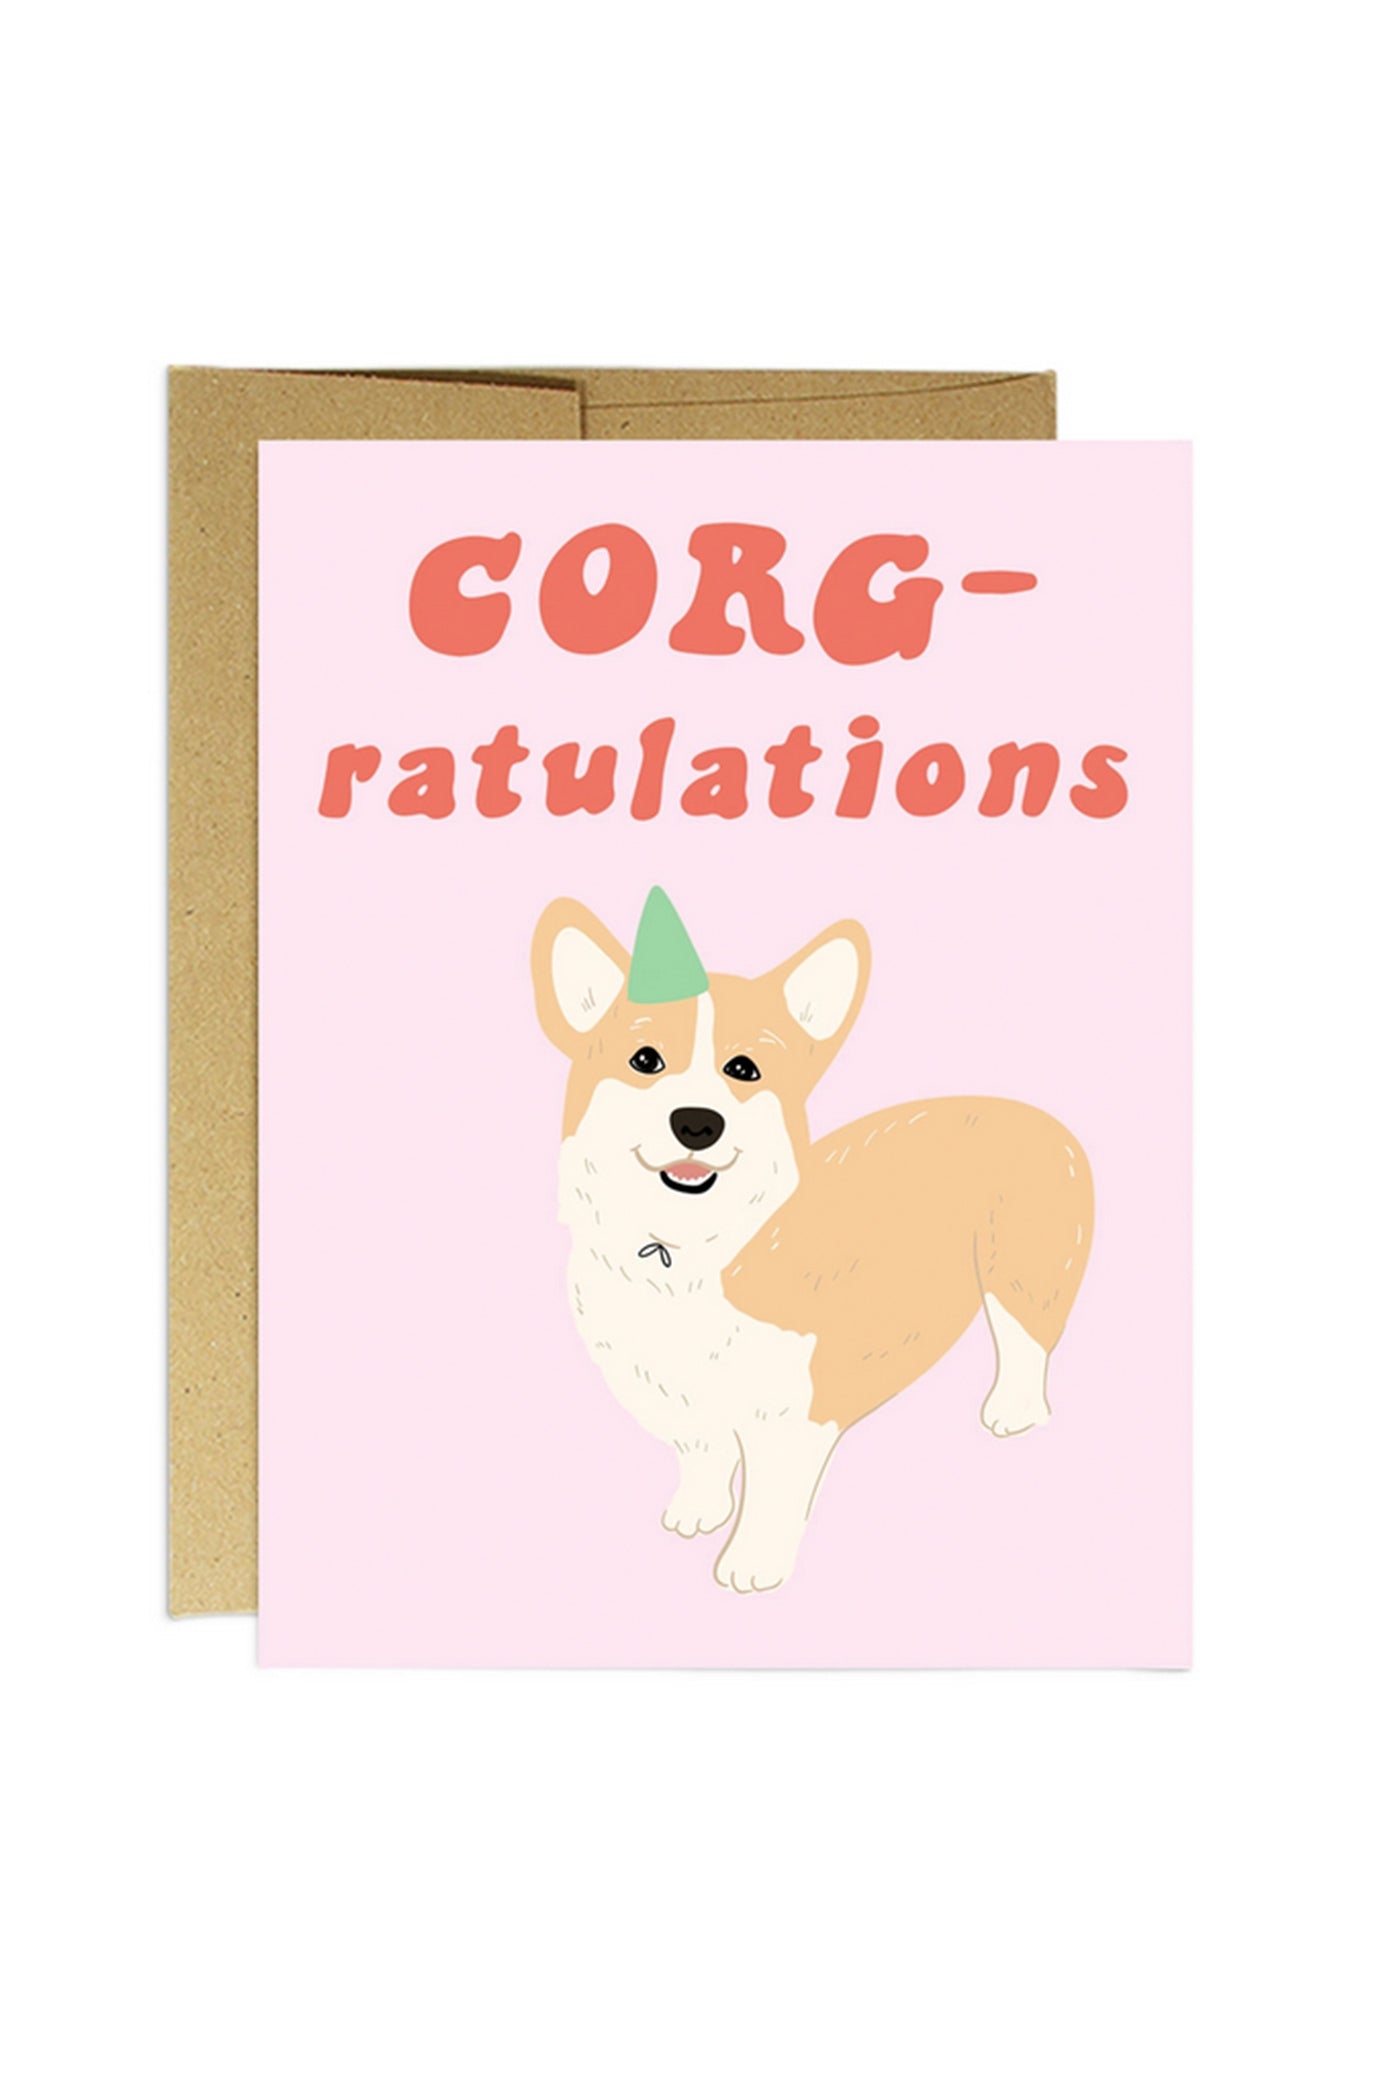 CORG-ulations Greeting Card by Party Mountain Paper Co.